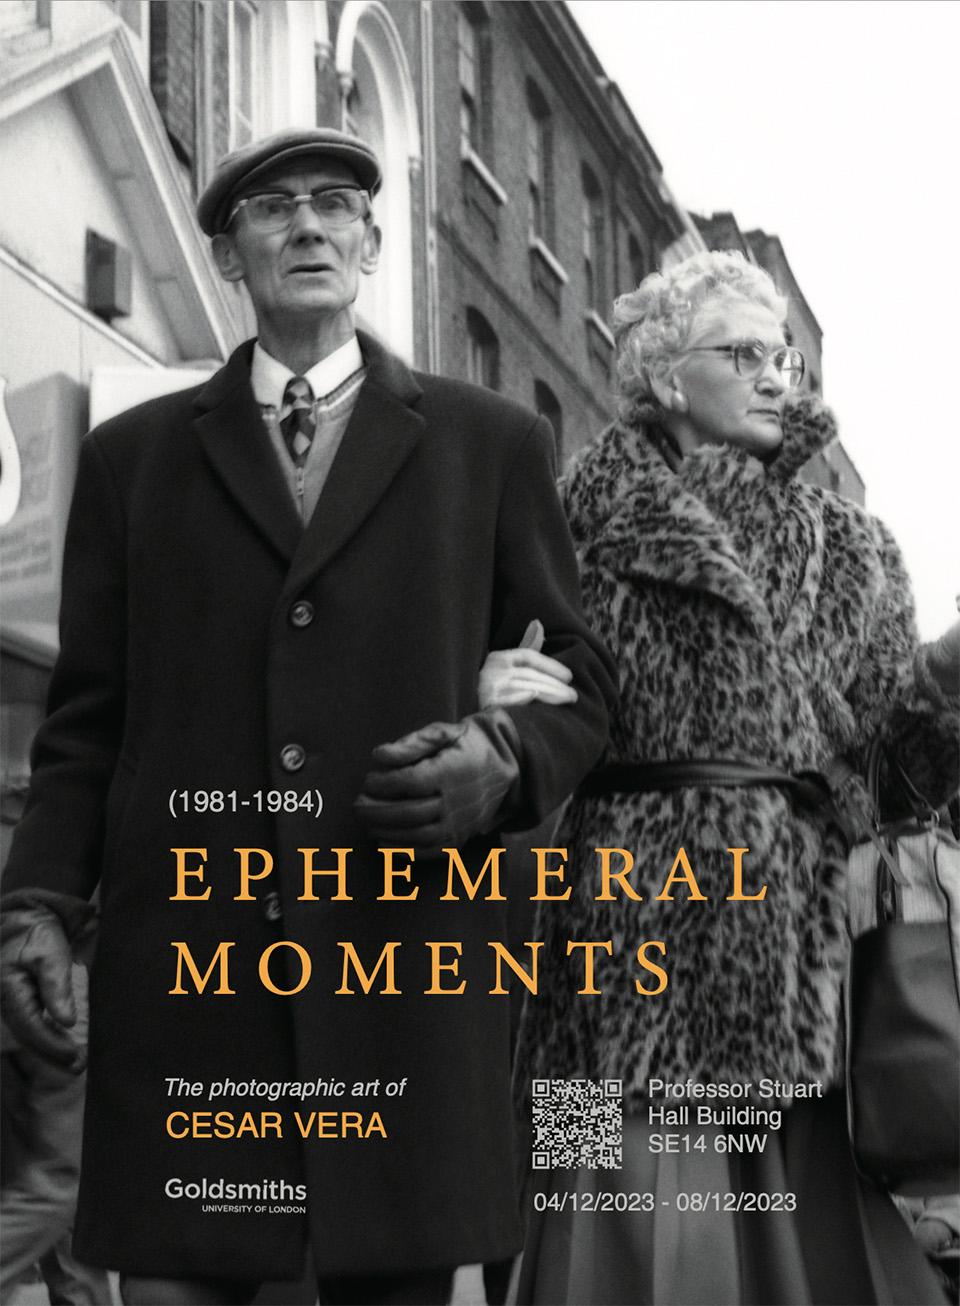 Exhibition poster for Ephemeral Moments: The Photographic Art of Cesar Vera 1981-1984